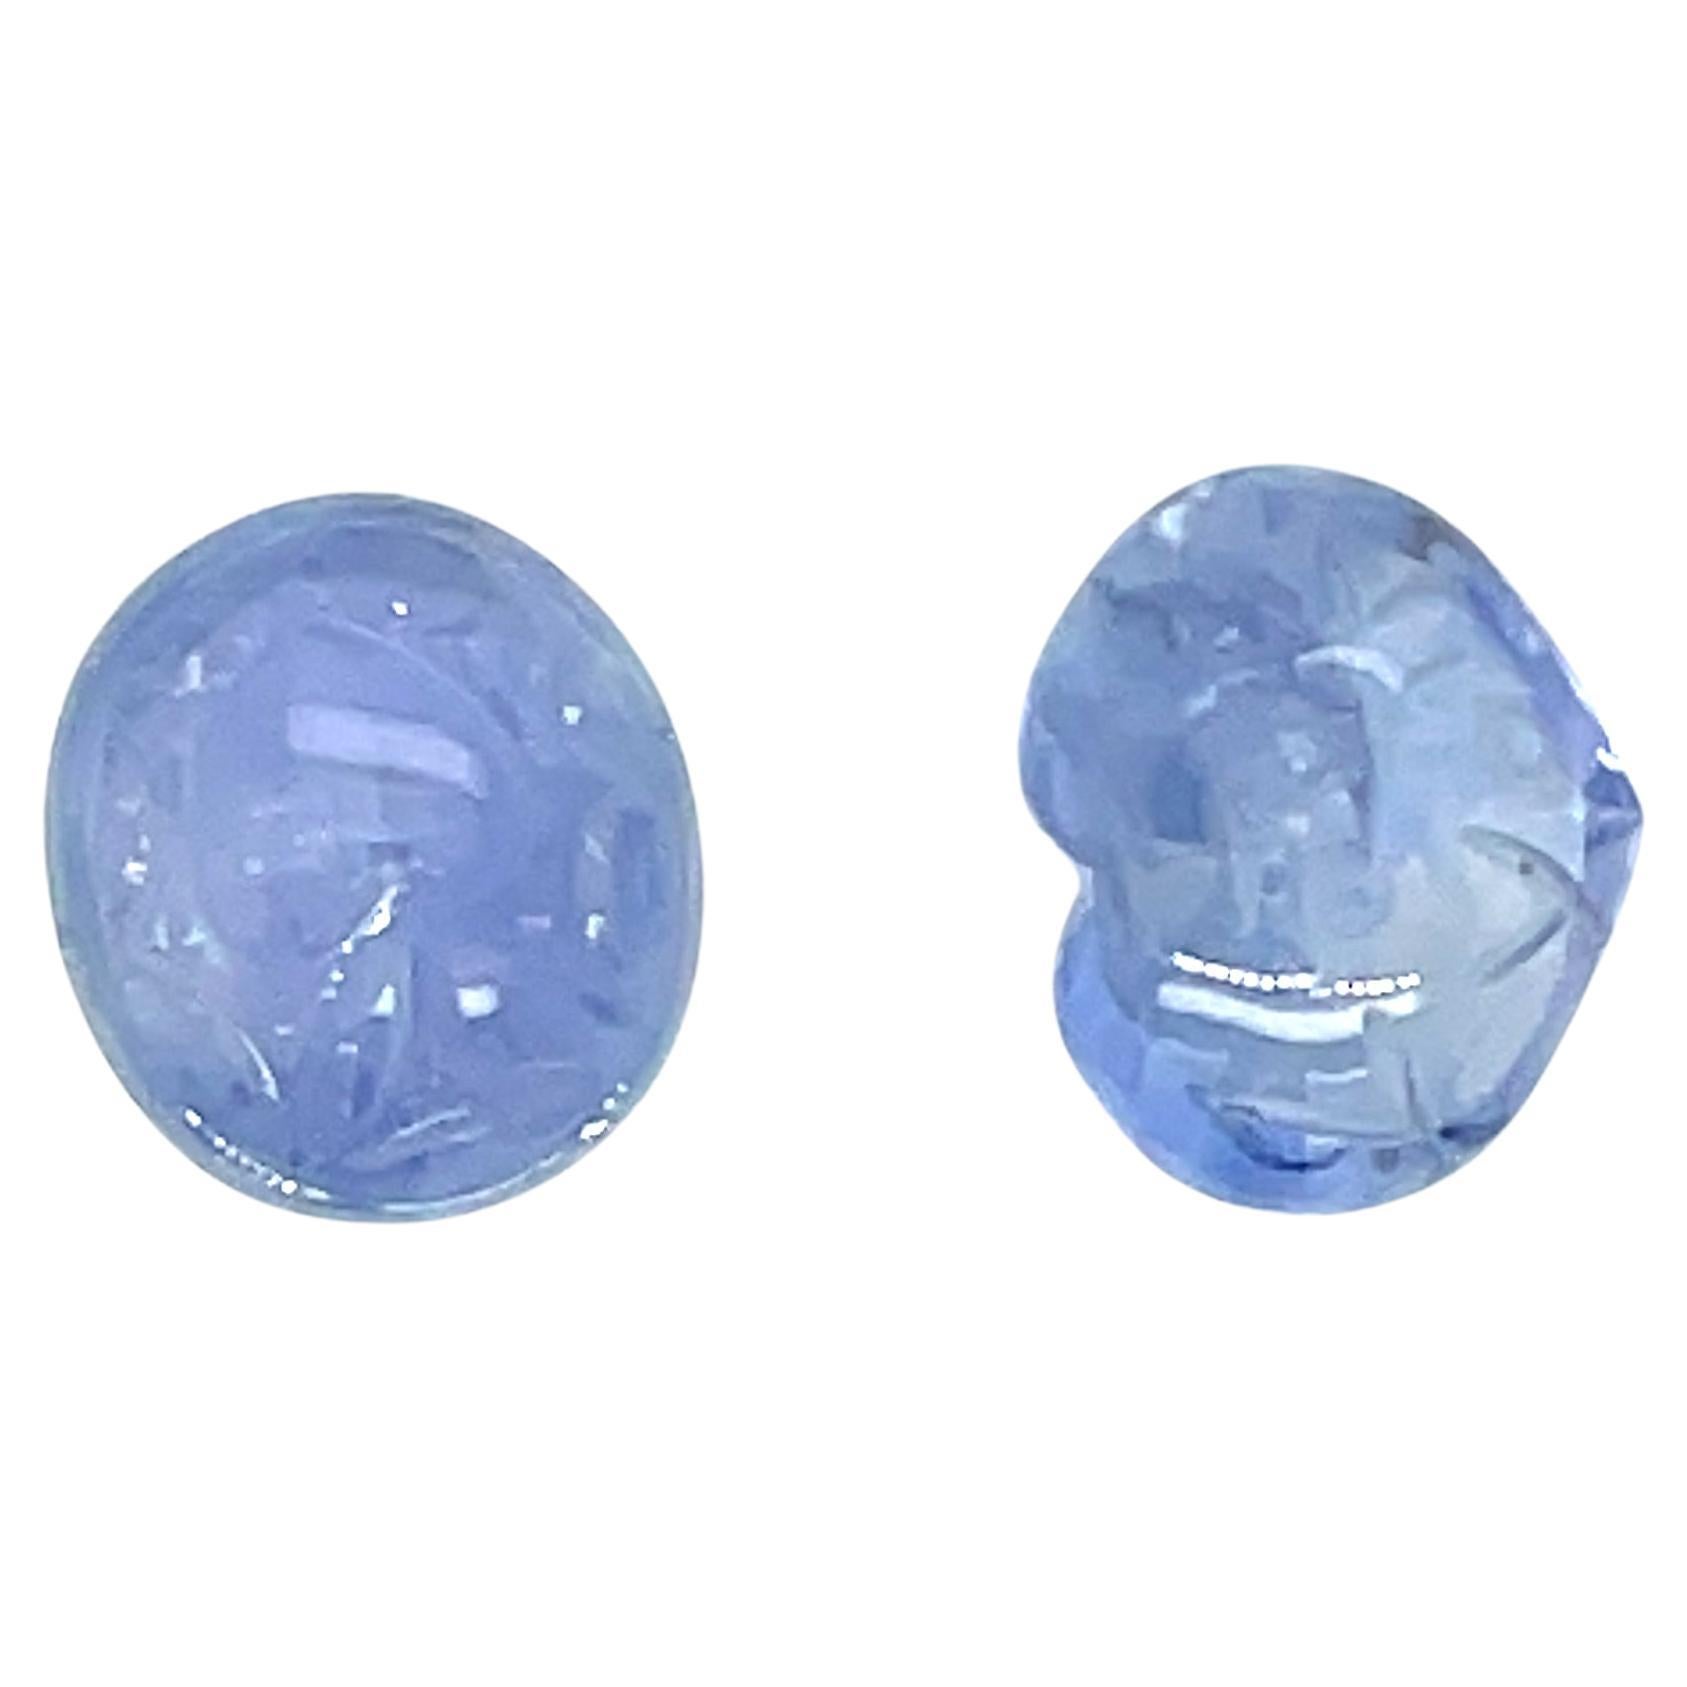 Carved Oval and Heart-Shaped Sapphire Cabochons Cts 14.93 For Sale